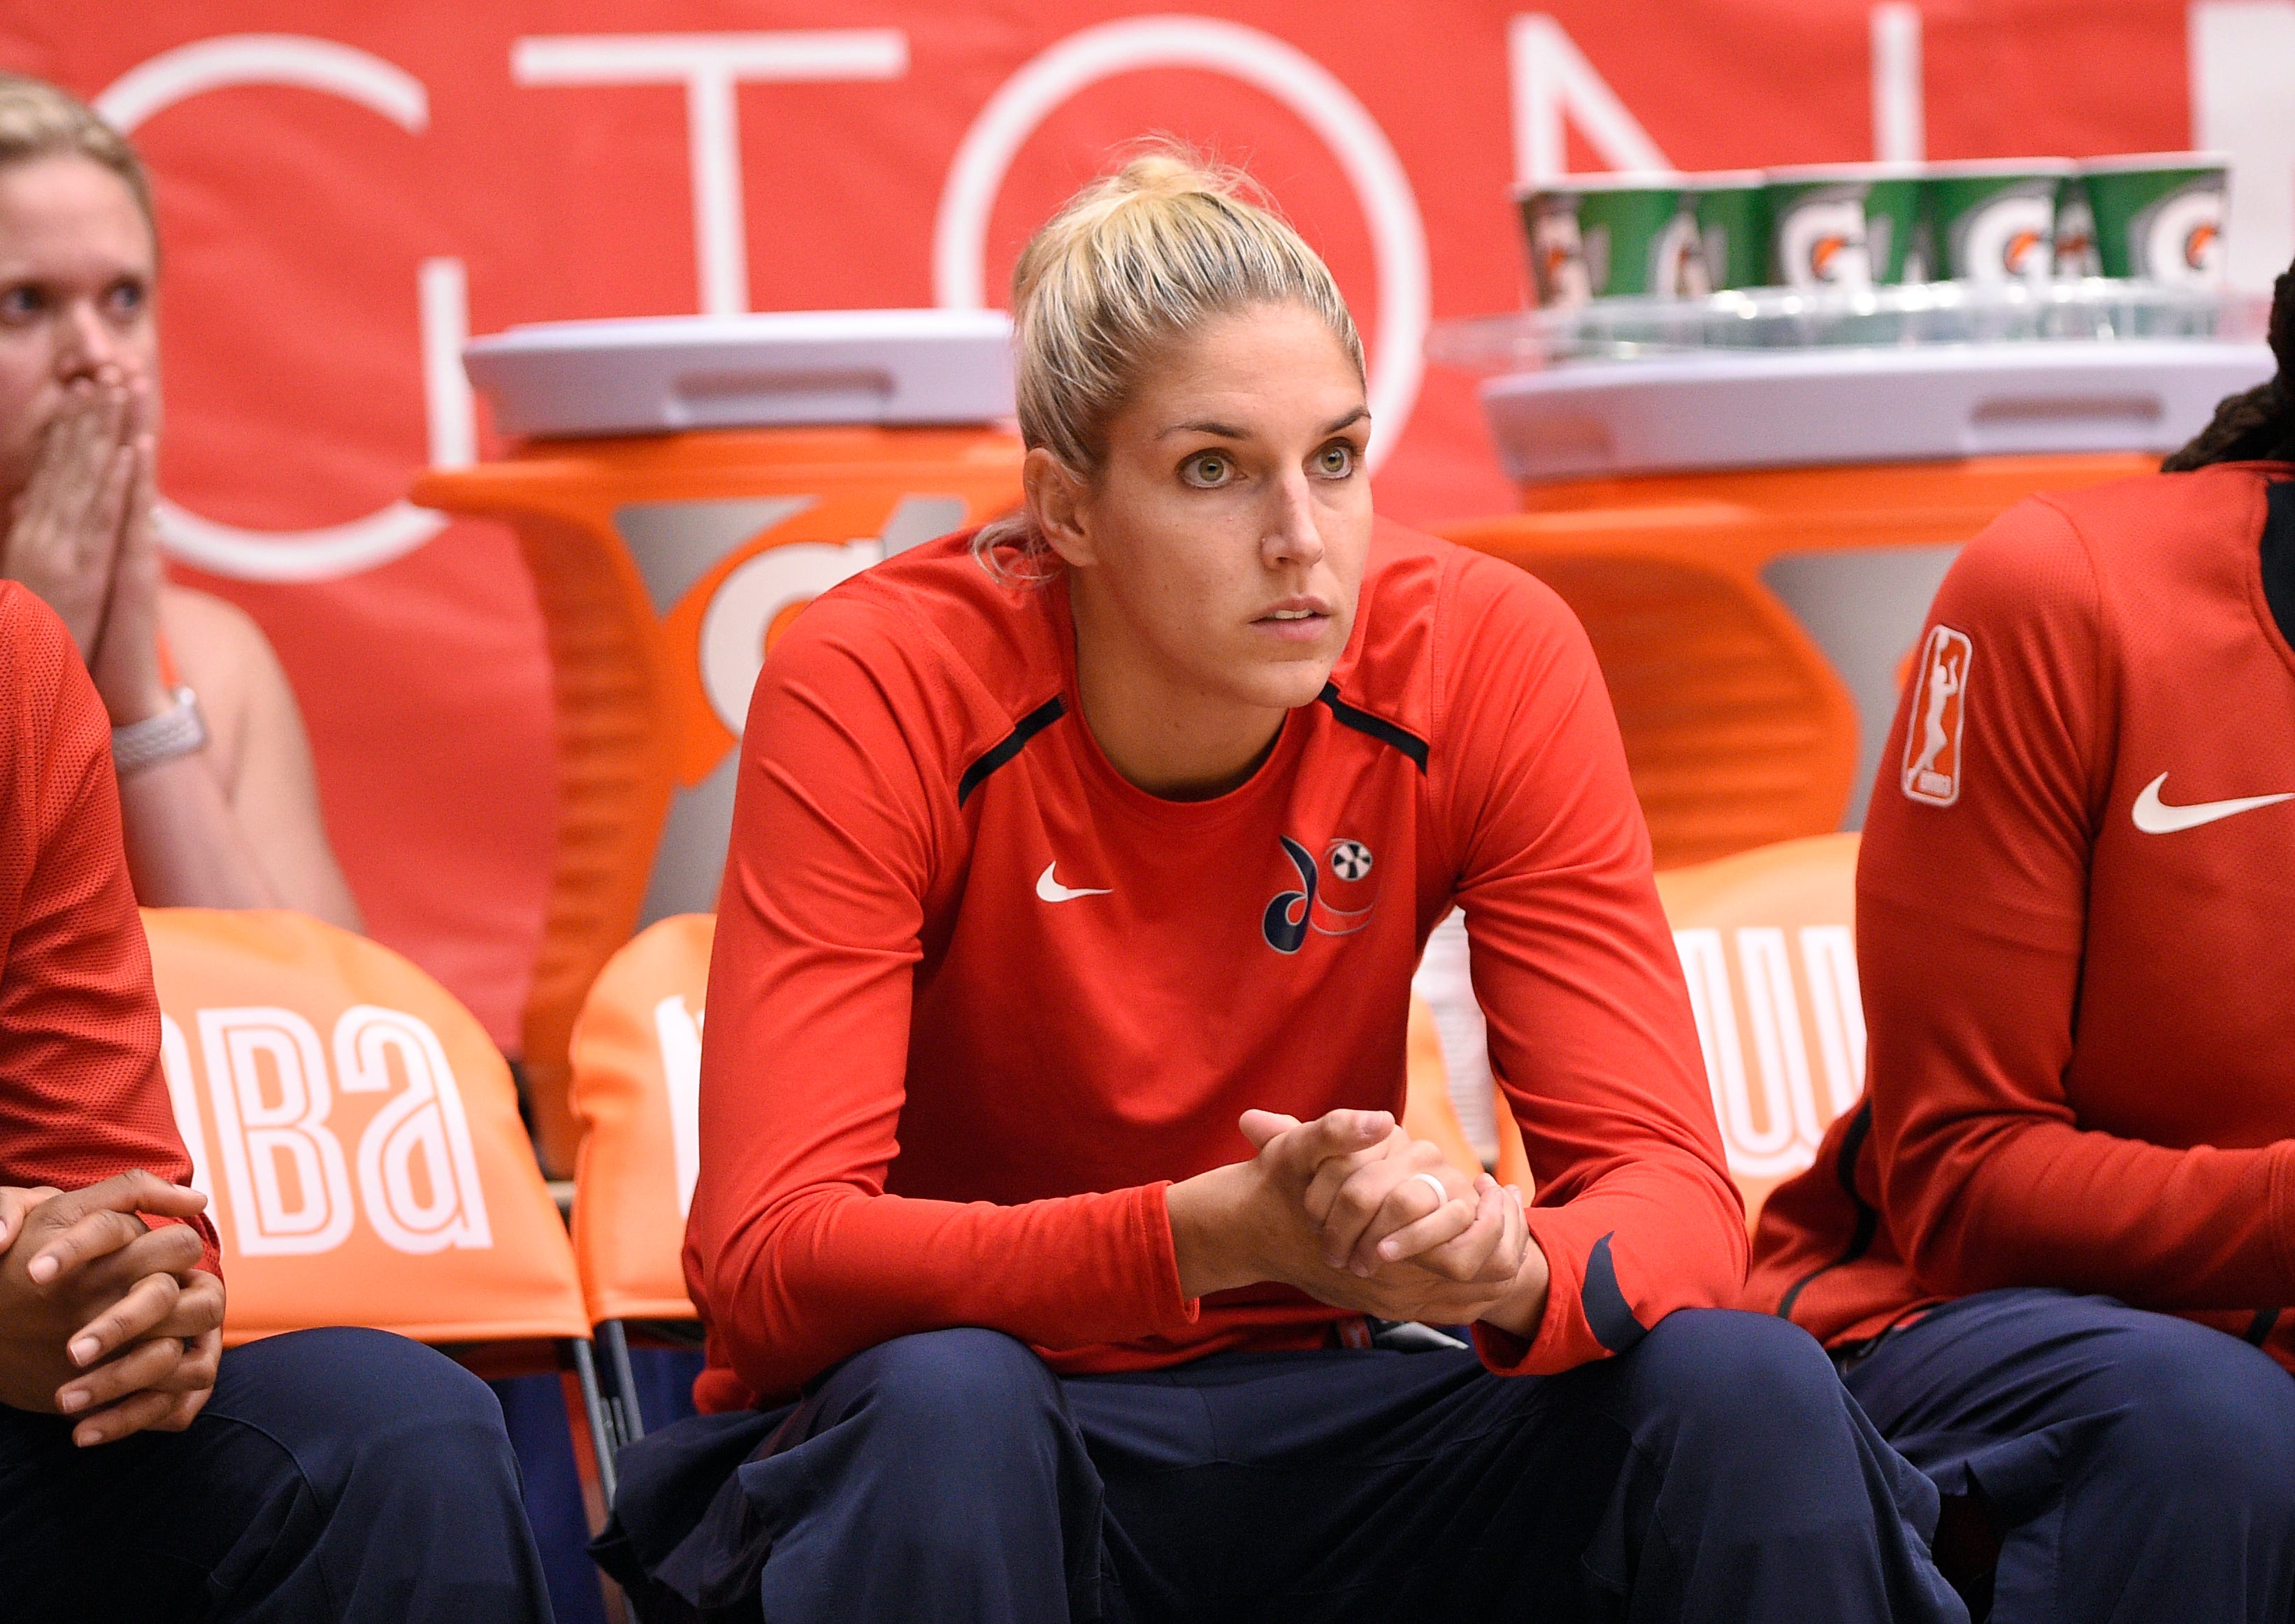 Elena Delle Donne on coming out during the Olympics